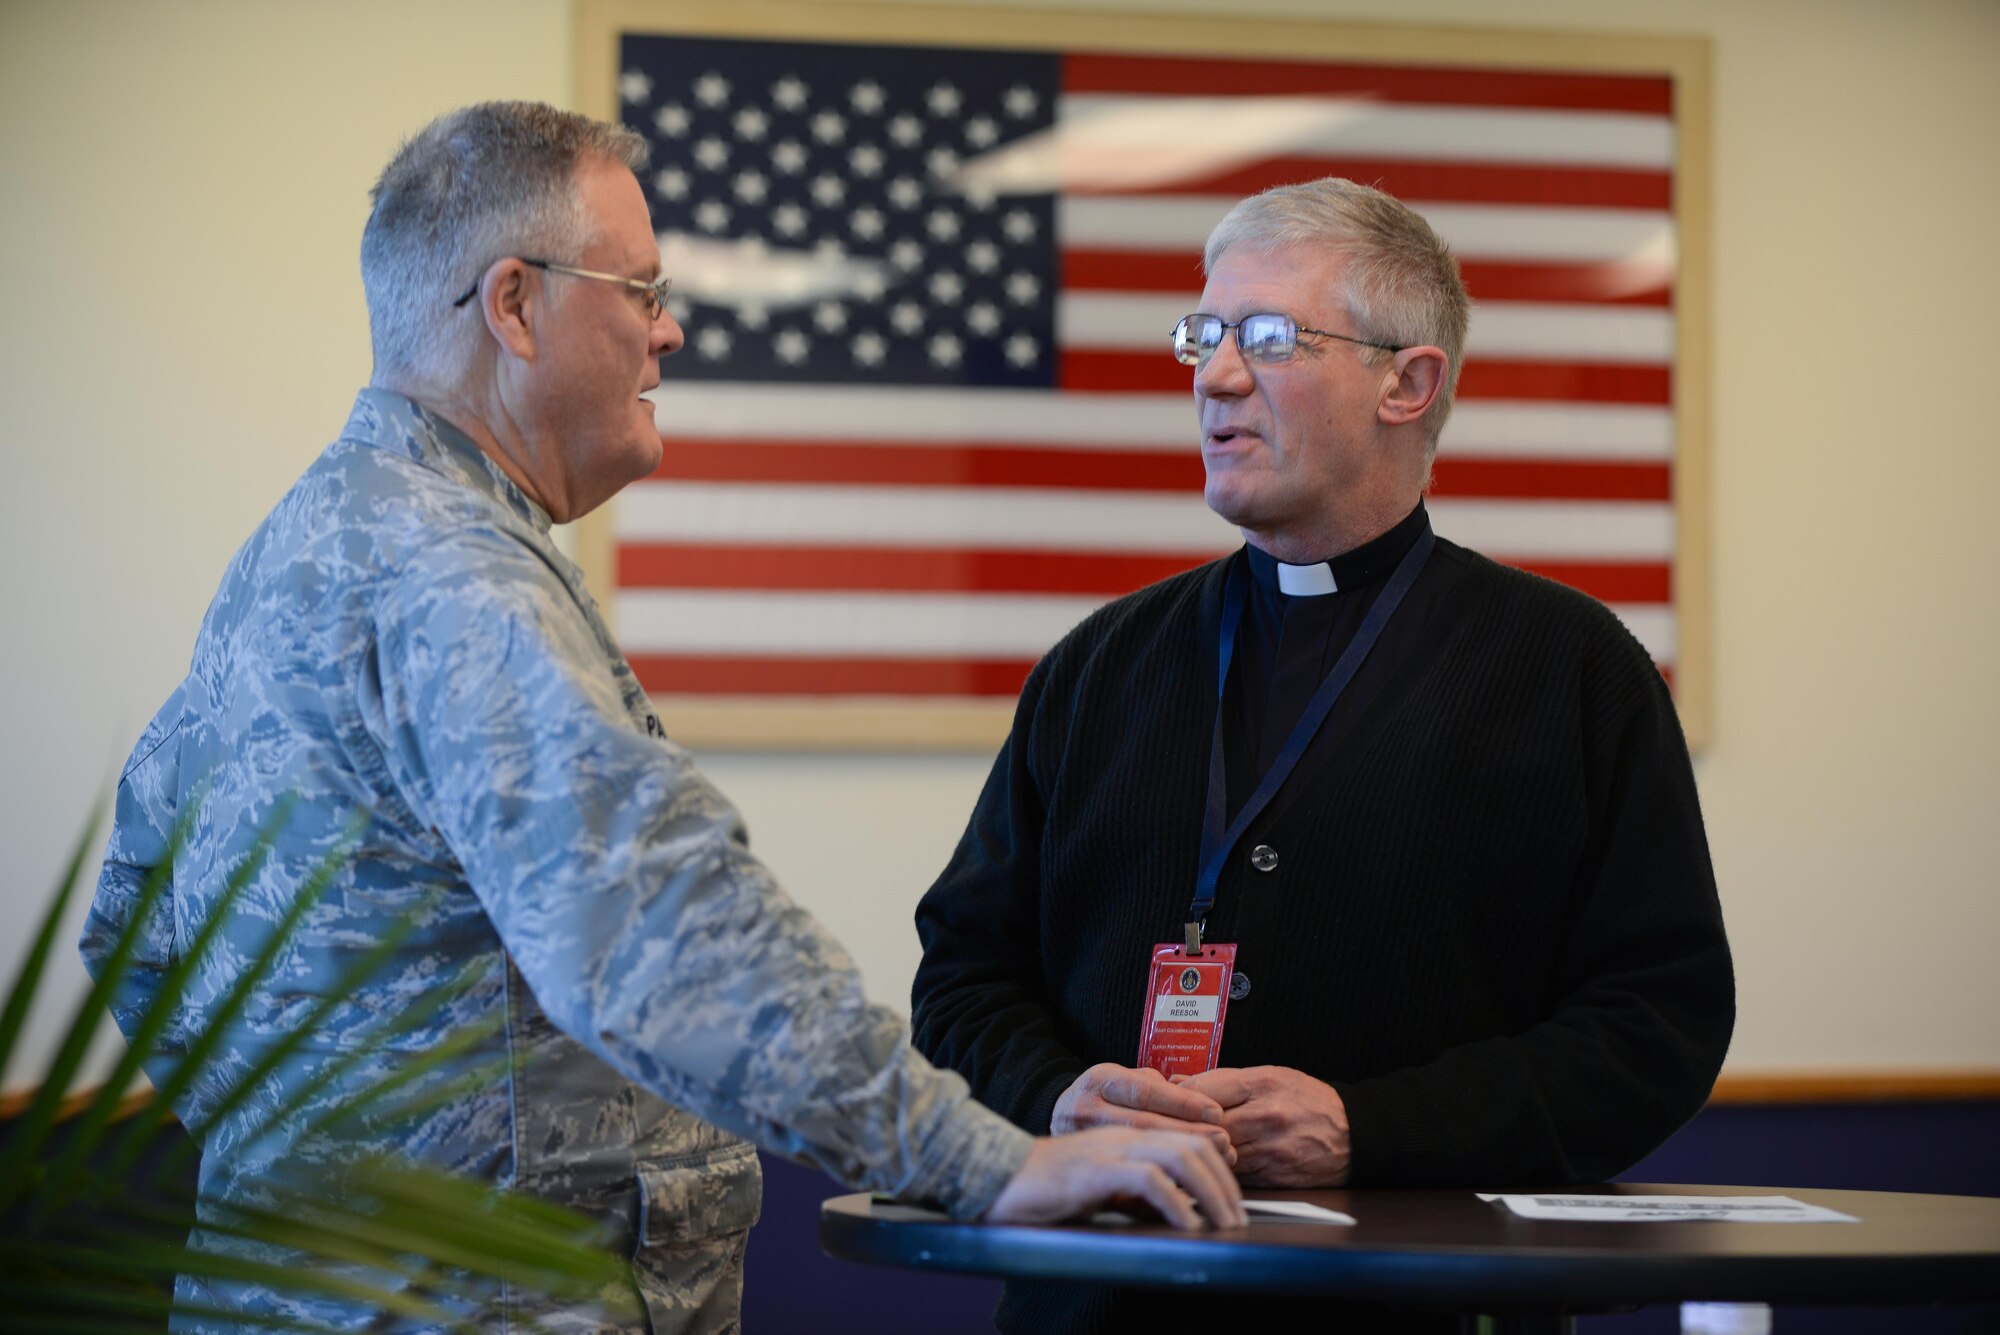 Chaplain (Lt. Col.) James Parrish, 55th Wing Chaplain, and David Reeson, Saint Columbkill Parish pastor, discuss religious matters during the 2017 Clergy Partnership Event at the Capehart Chapel here April 6. More than 20 religious leaders from denominations from across the Omaha metro attended this event.  (U.S. Air Force photo by Zachary Hada)